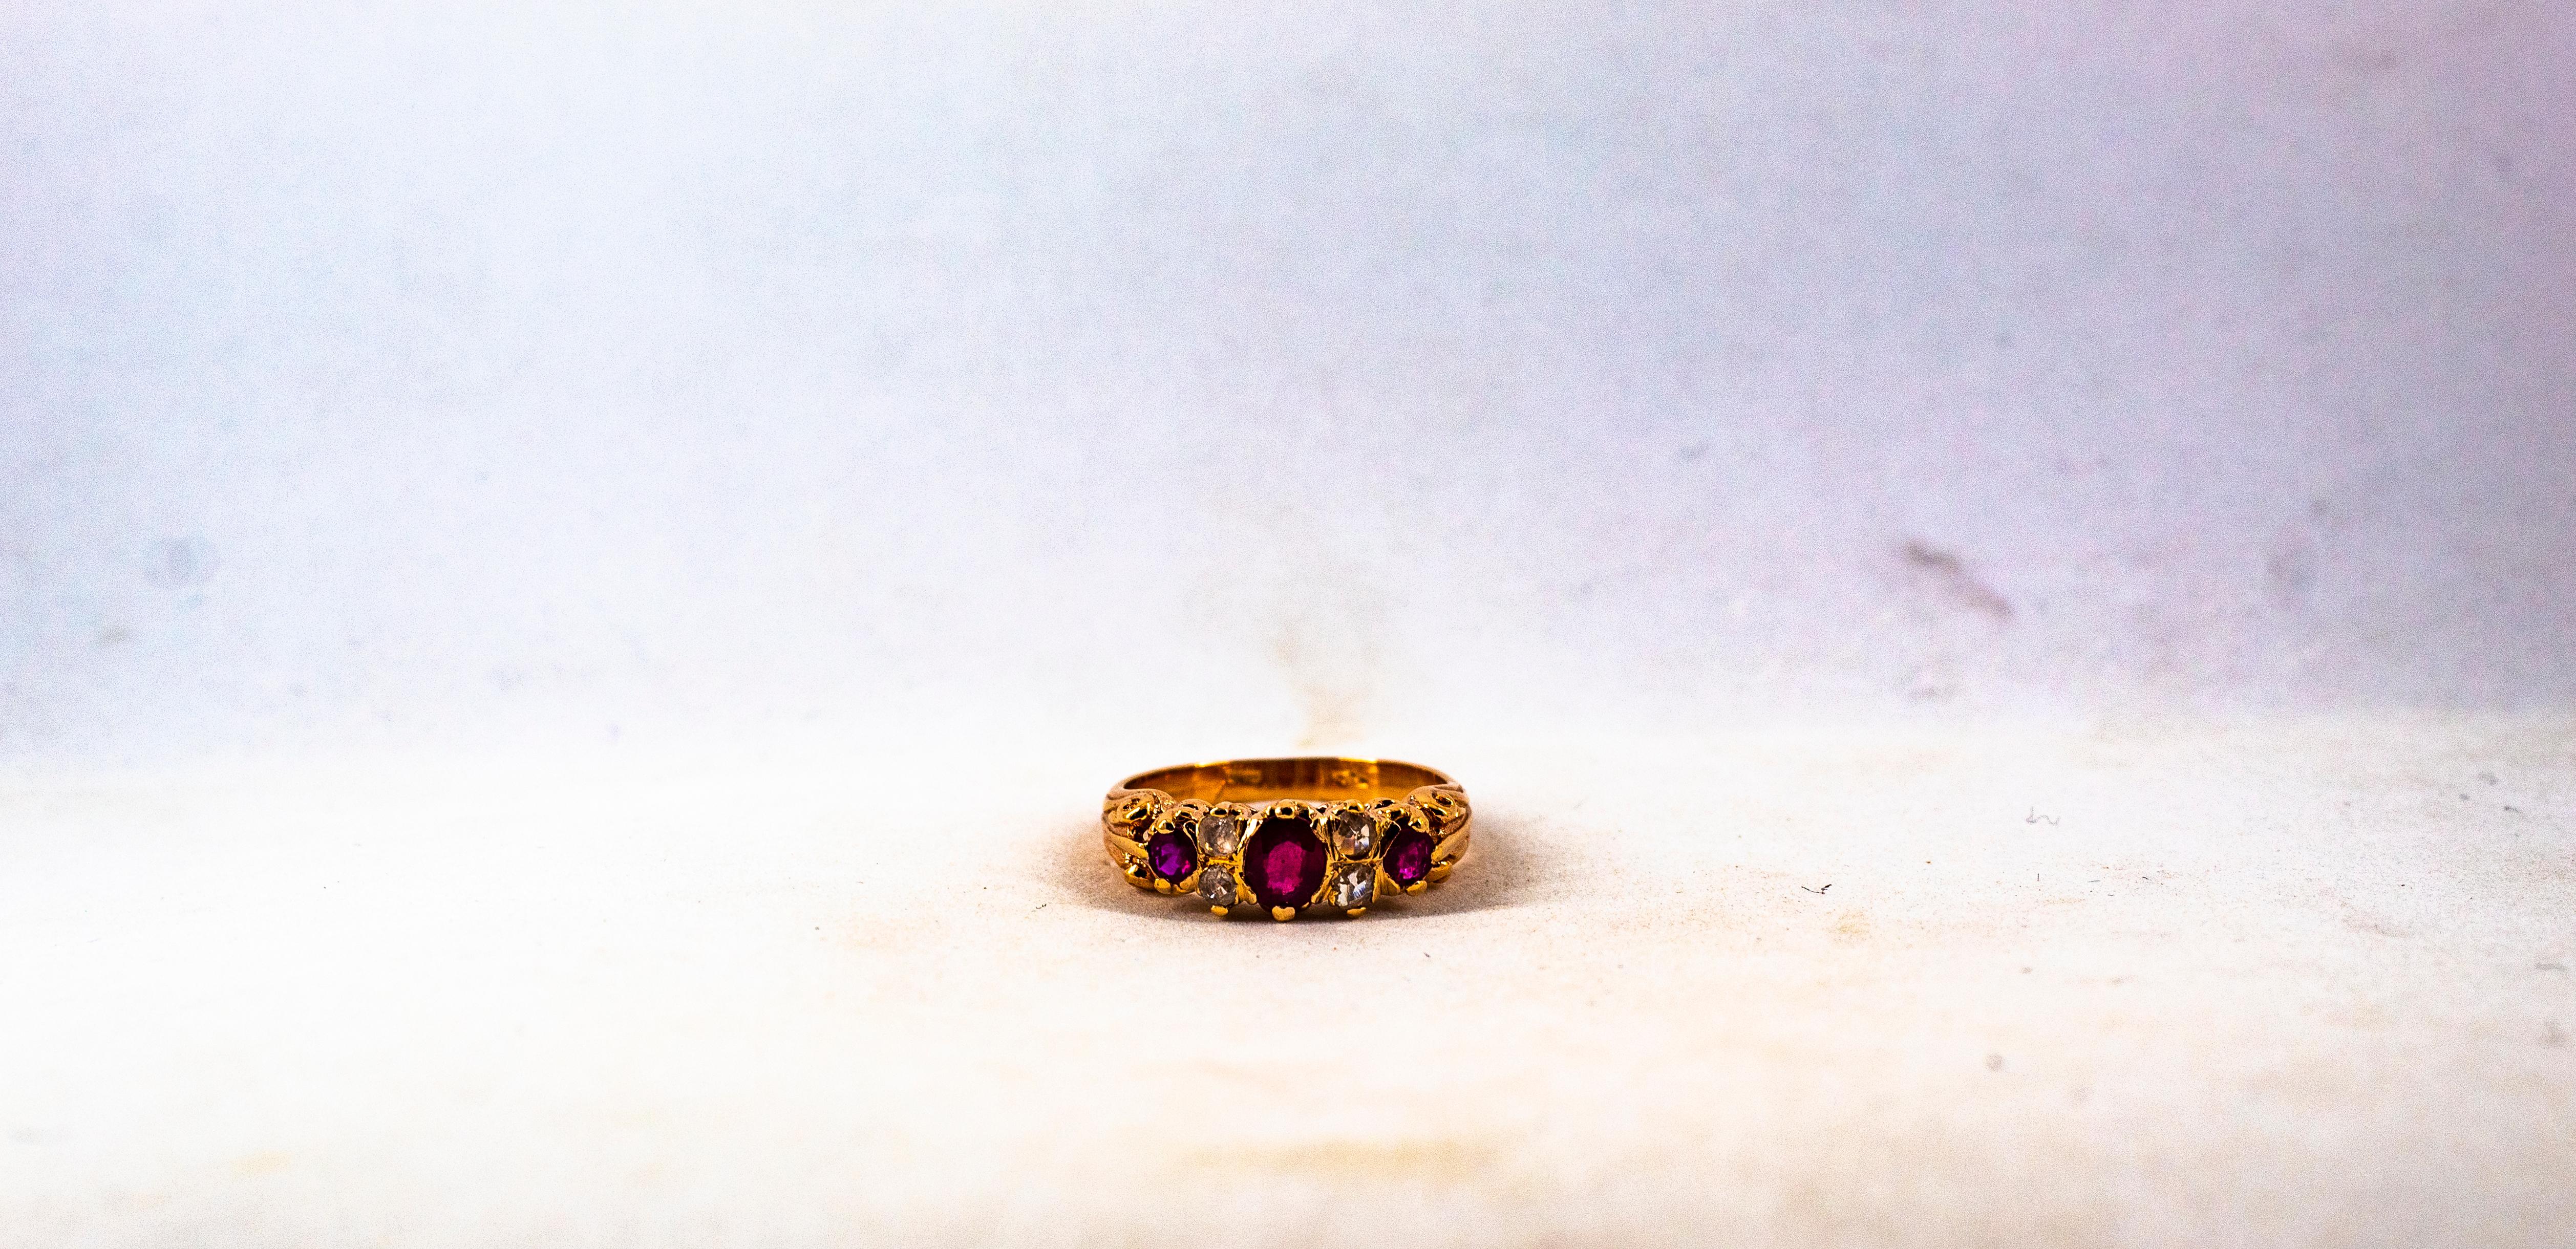 This Ring is made of 9K Yellow Gold.
This Ring has 0.15 Carats of White Rose Cut Diamonds.
This Ring has 0.60 Carats of Oval Cut Rubies.

This Ring is available also in 14 or 18K Yellow or White Gold.
This Ring is available also with Blue Sapphires